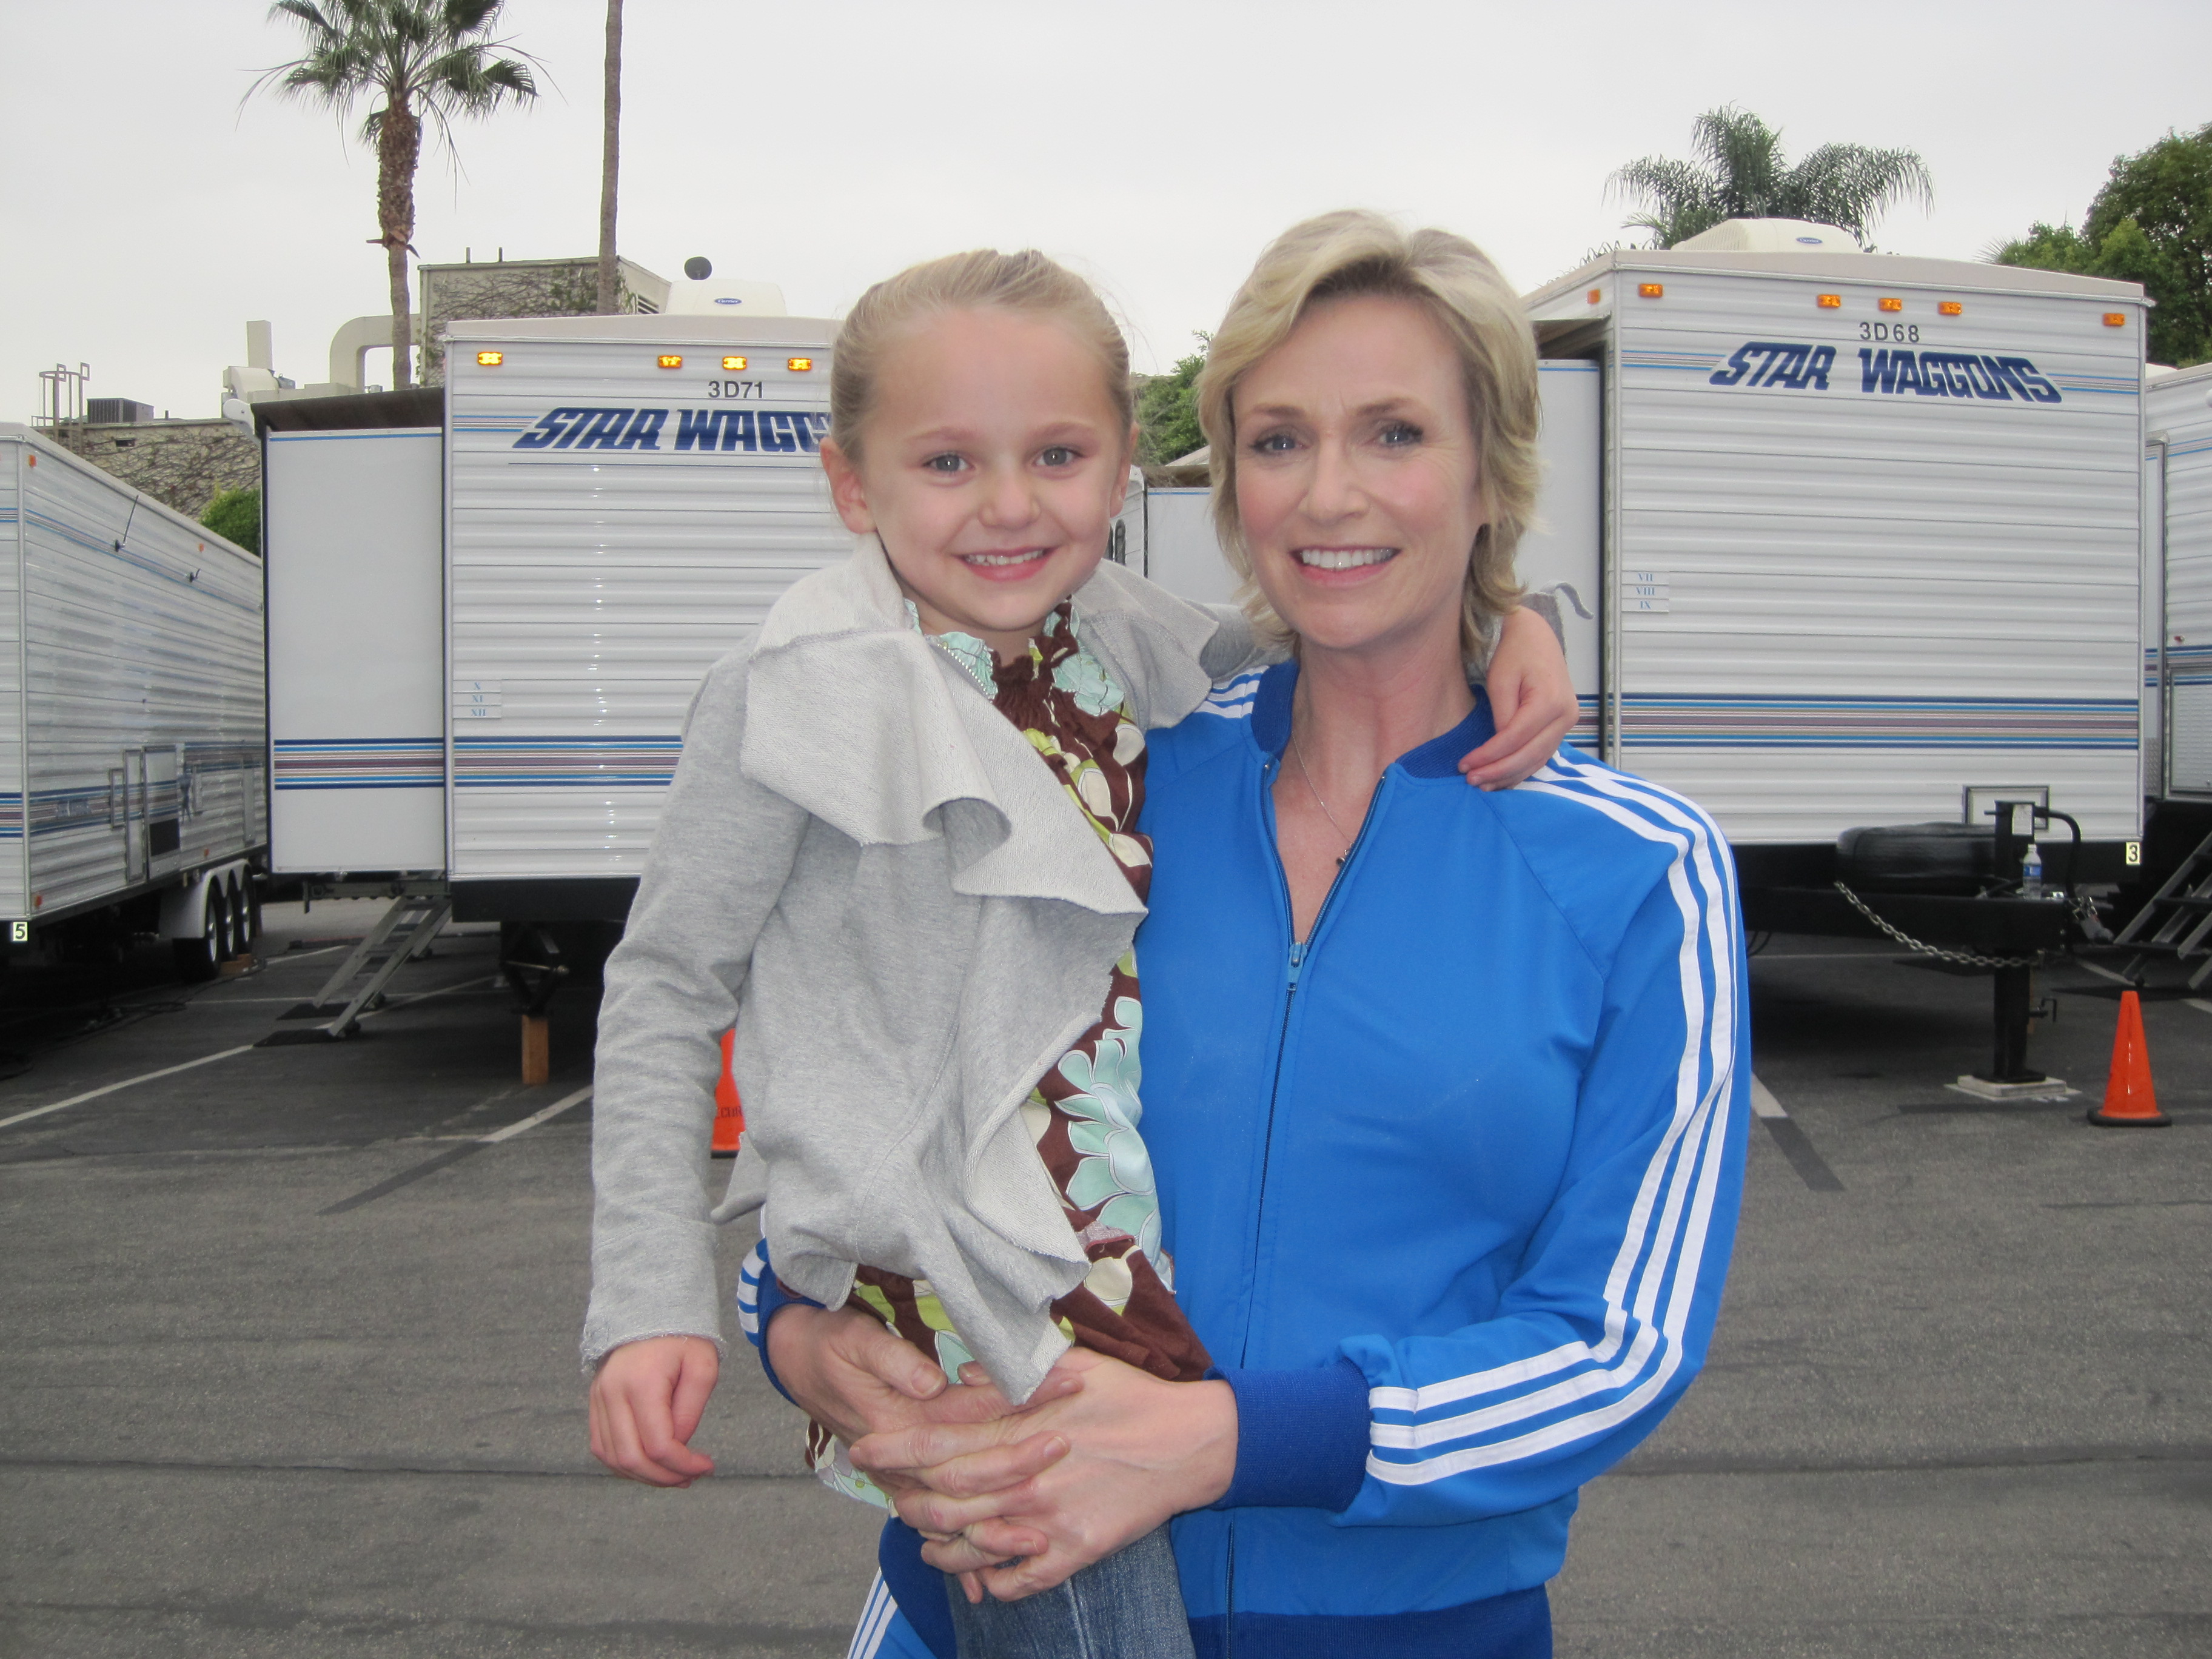 Jane Lynch and Avery Phillips on set of Glee